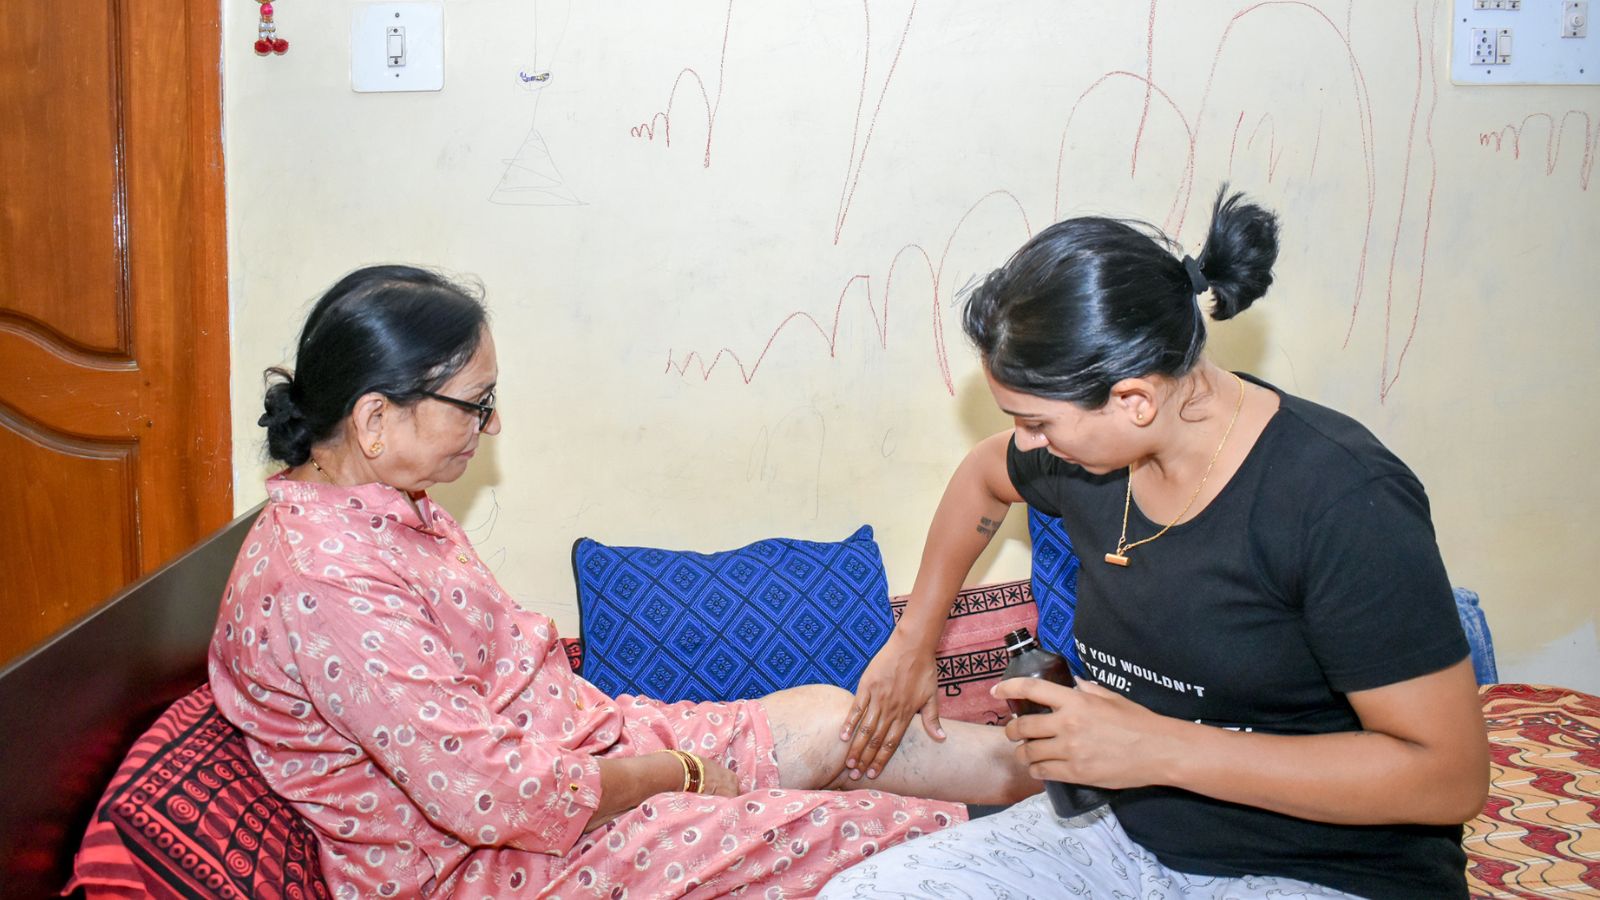 After Divya’s divorce, her parents, who are in their 70s, shifted to Bengaluru from Chikkamagaluru district, 350 km away, to help out with their grandson. (Express photo by Jithendra M)